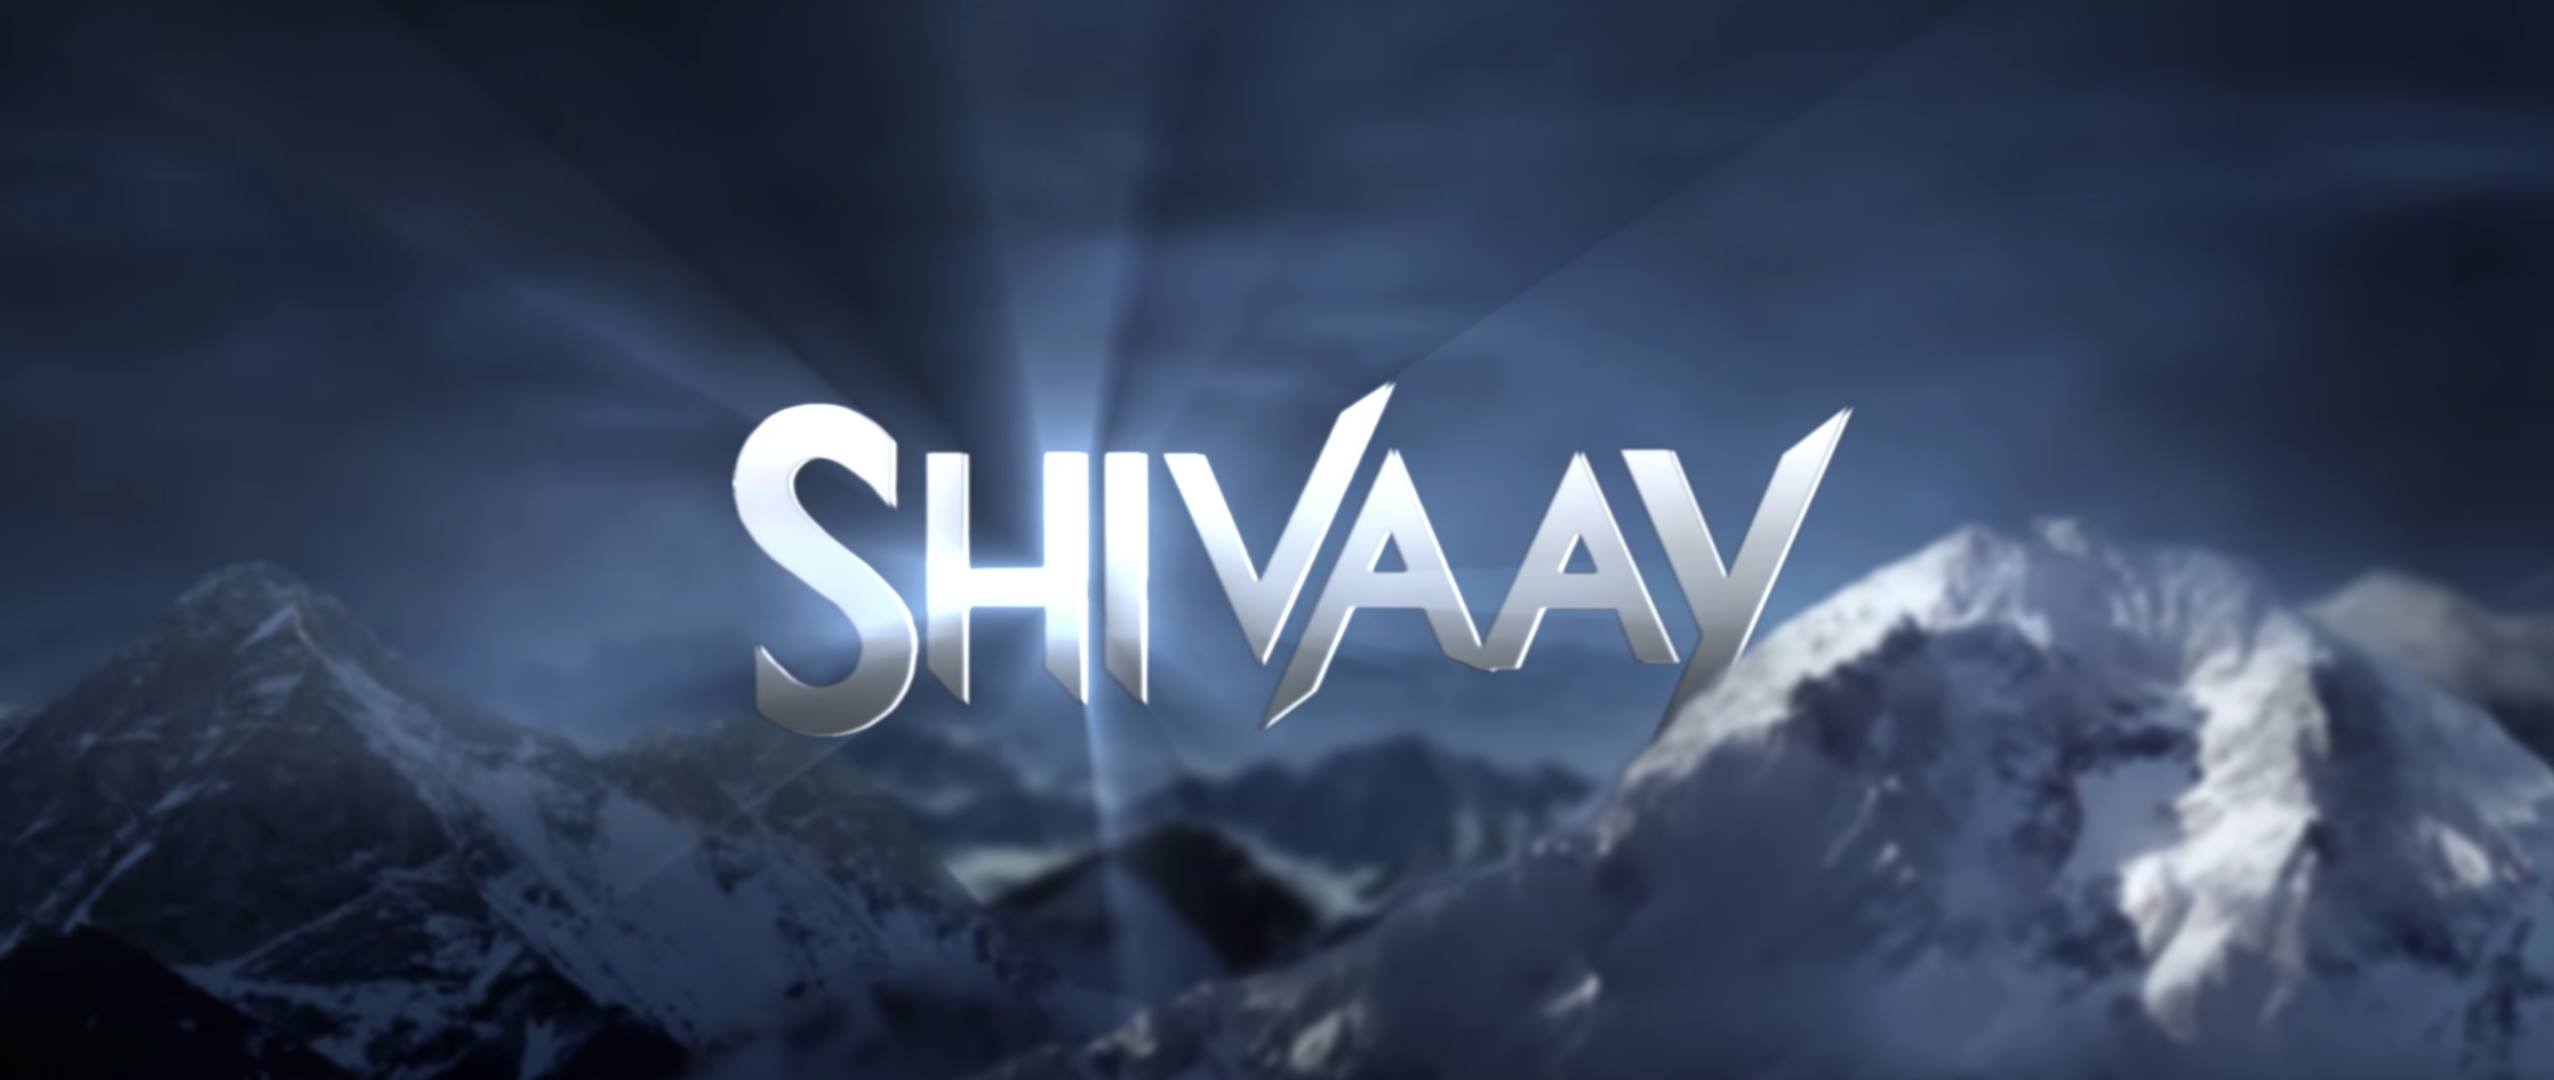 WATCH | Second trailer of Ajay Devgn's Shivaay: It's emotions over action  this time!